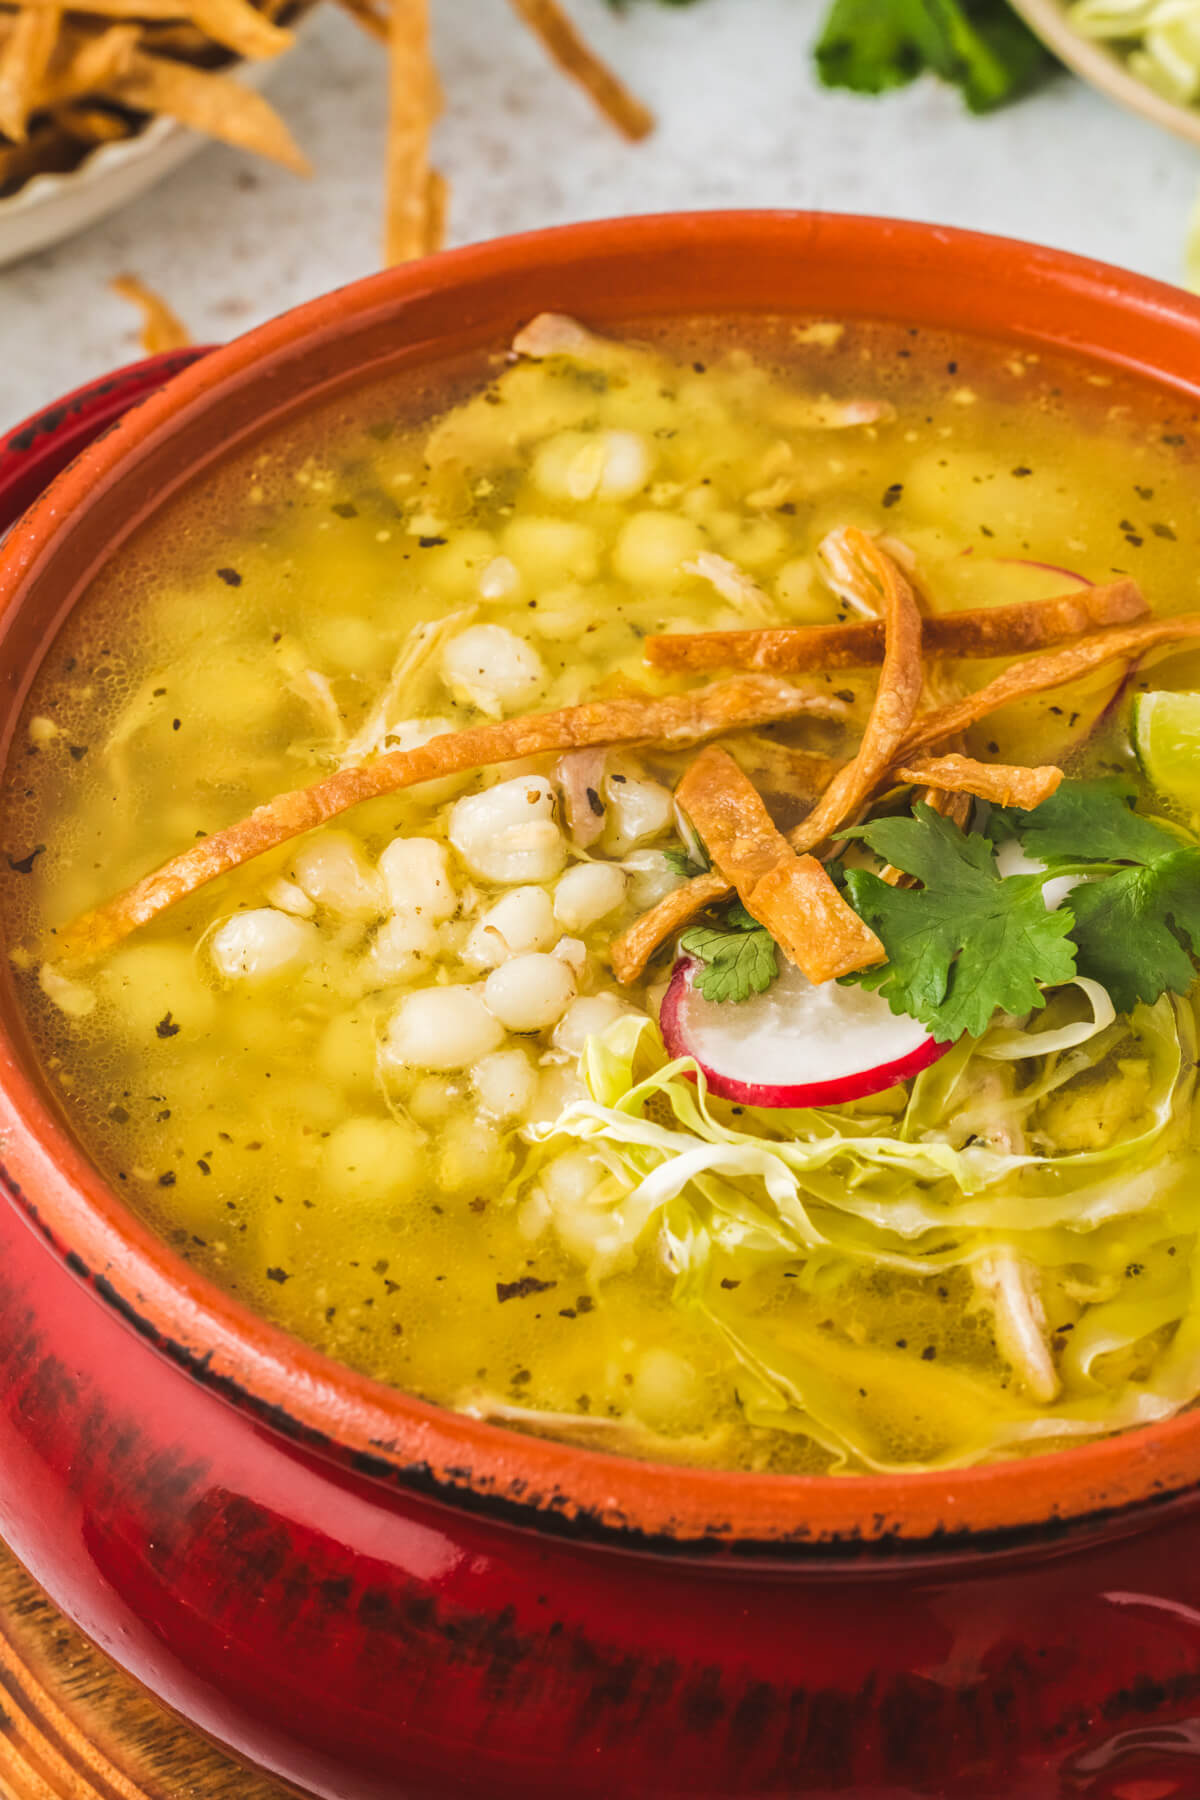 A bright terra cotta pot filled with Pozole blanco featuring white hominy, cilantro, radishes, cabbage, lime wedge, and strips of fried tortilla.